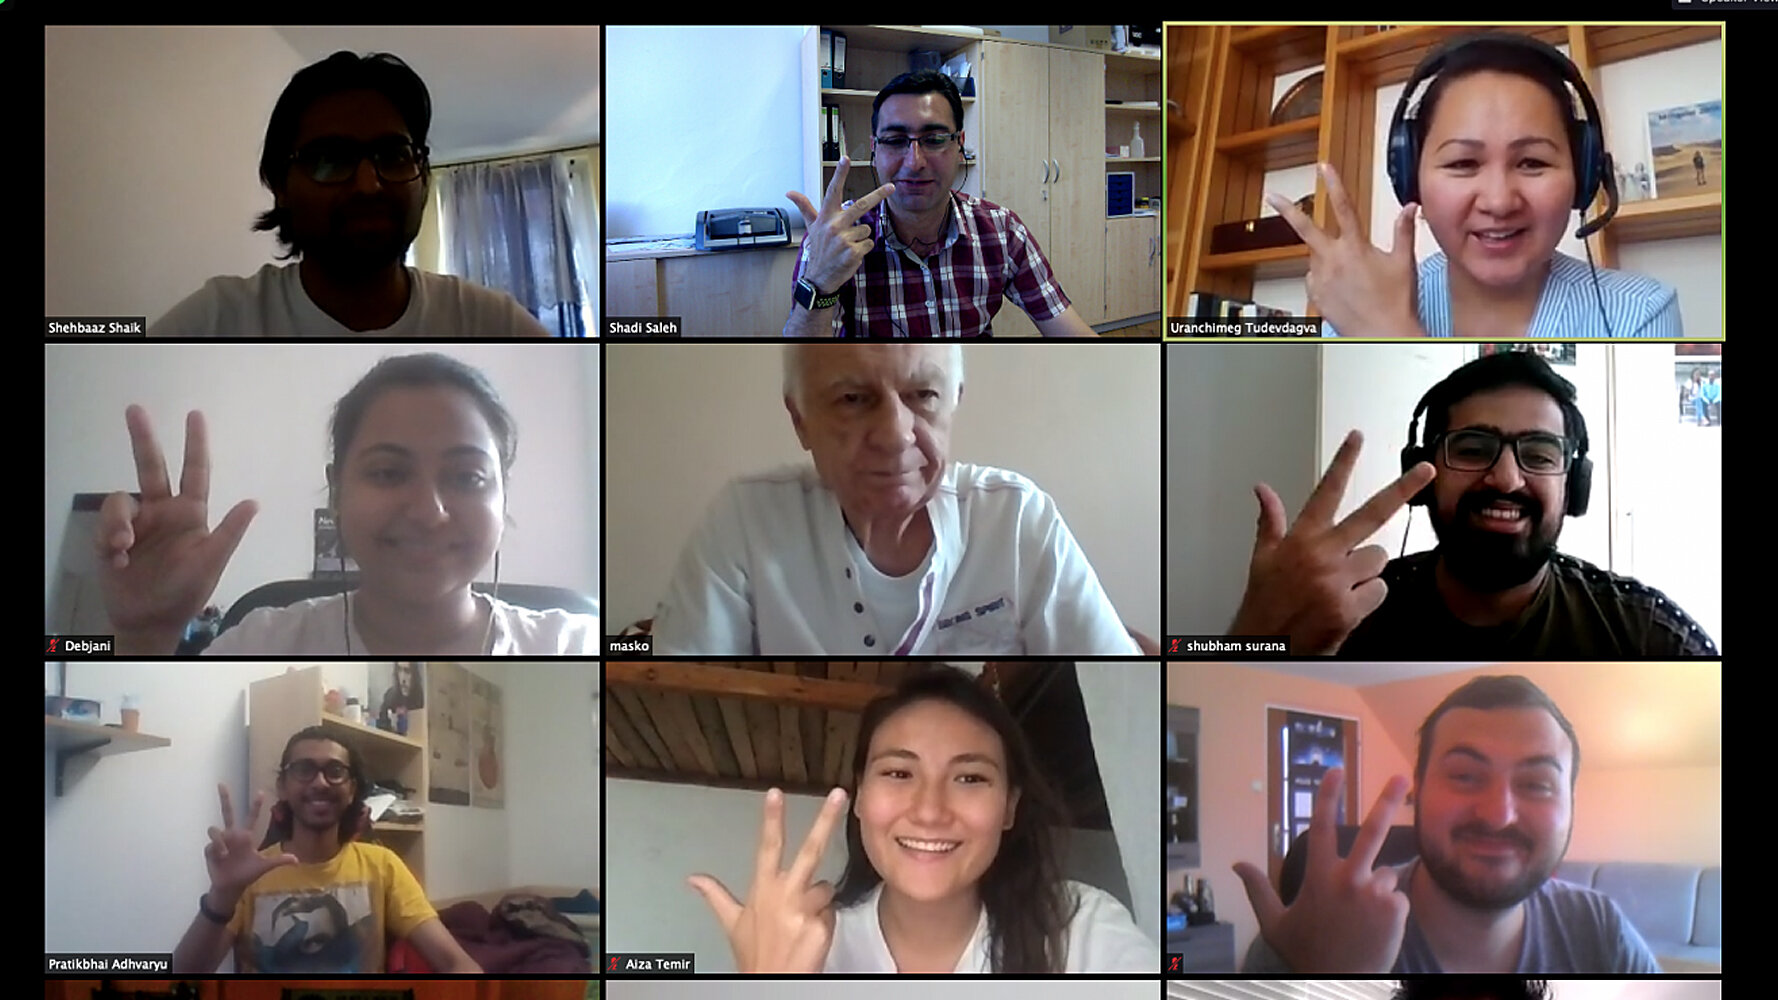 Screenshot from a video conference showing nine men and women